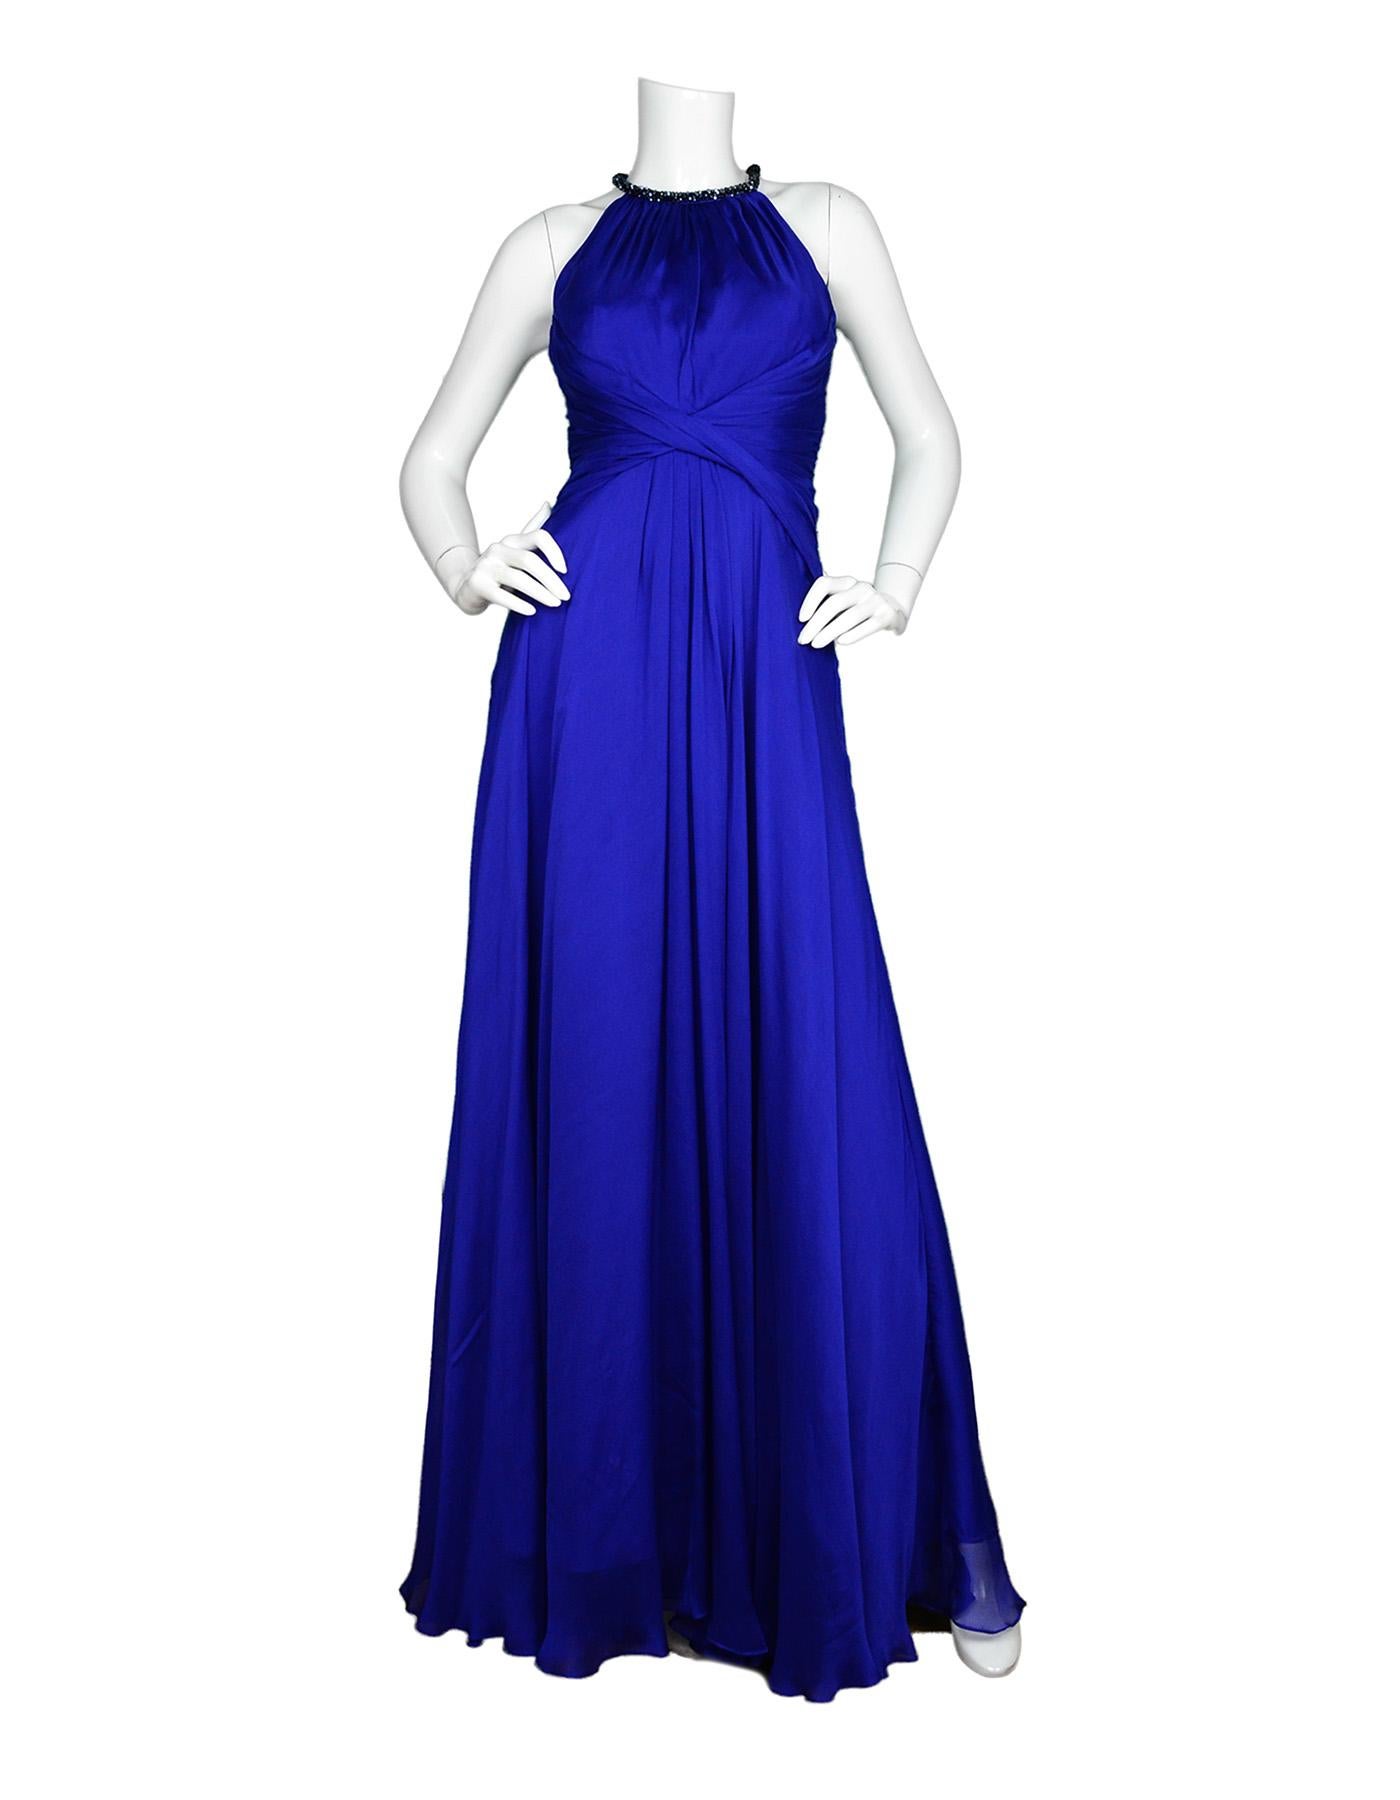 Carmen Marc Valvo NWT Royal Blue Silk Dress W/ Black Beaded Neckline Sz 2

Made In: China
Color: Royal blue and black
Materials: 100% Silk
Lining: 97% polyester, 3% spandex
Opening/Closure: Hidden back zipper
Overall Condition: New with